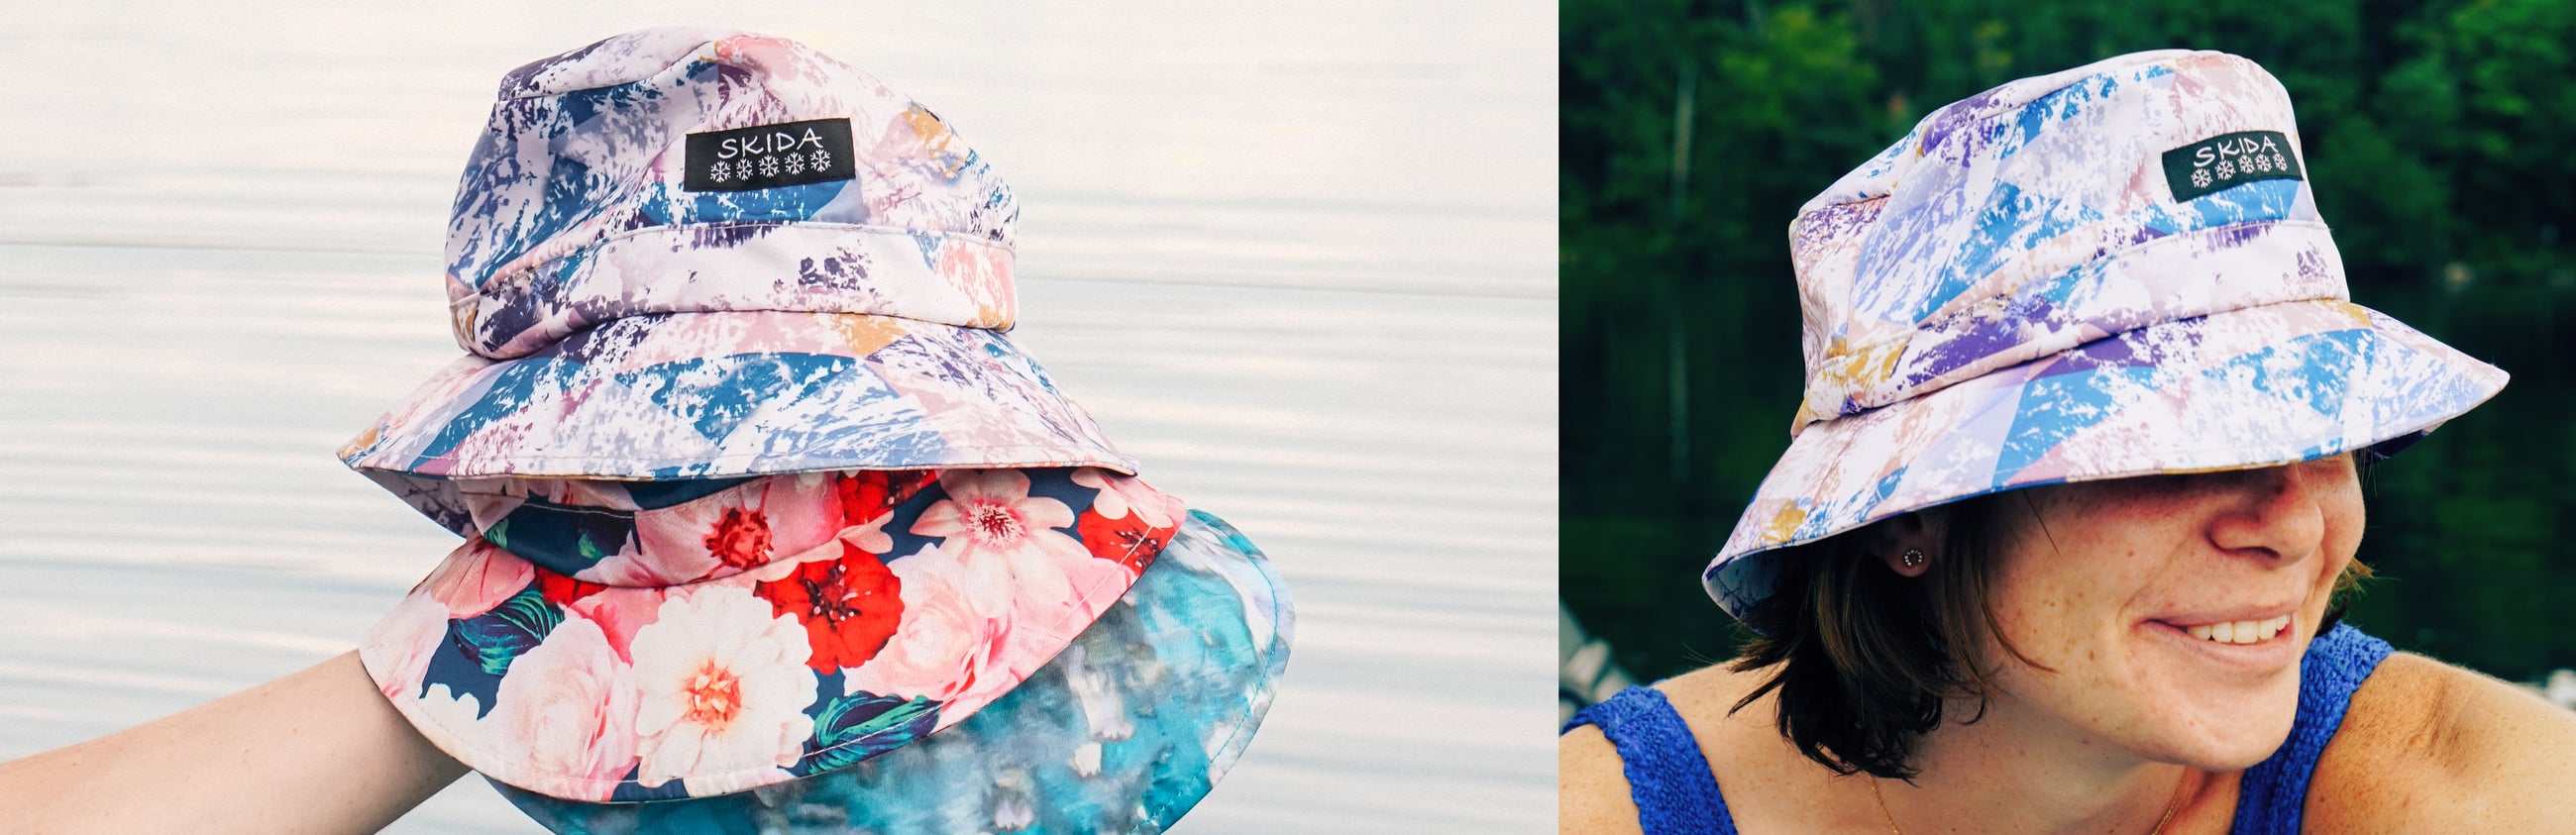 Our Bucket Hats provide 360 degrees of shade, rain or shine!